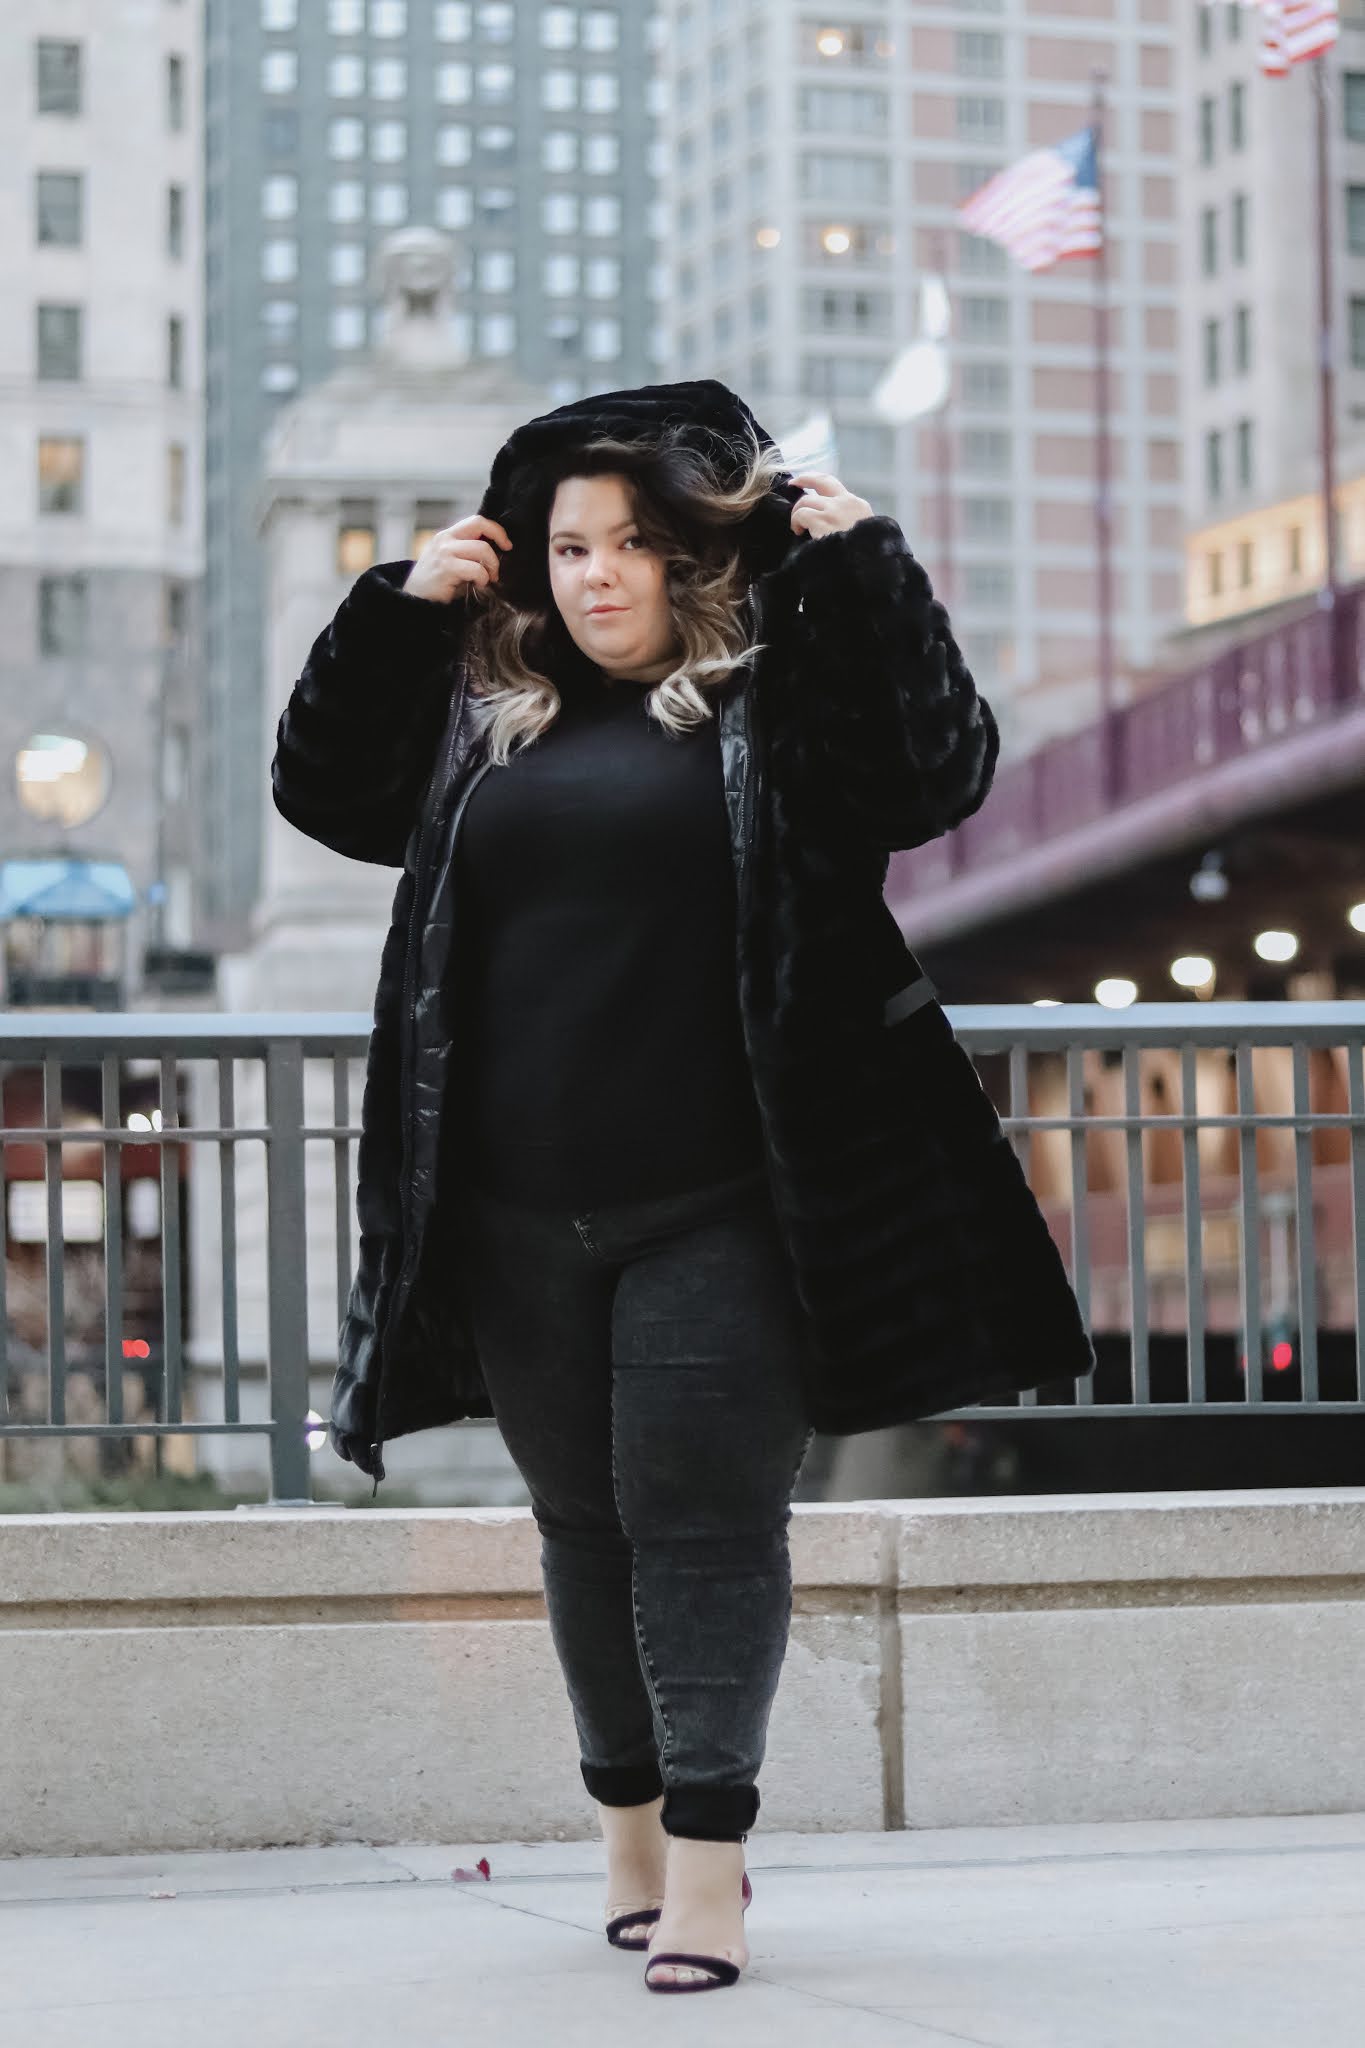 Chicago Plus Size Petite Fashion Blogger Natalie in the City wears a reversible winter jacket